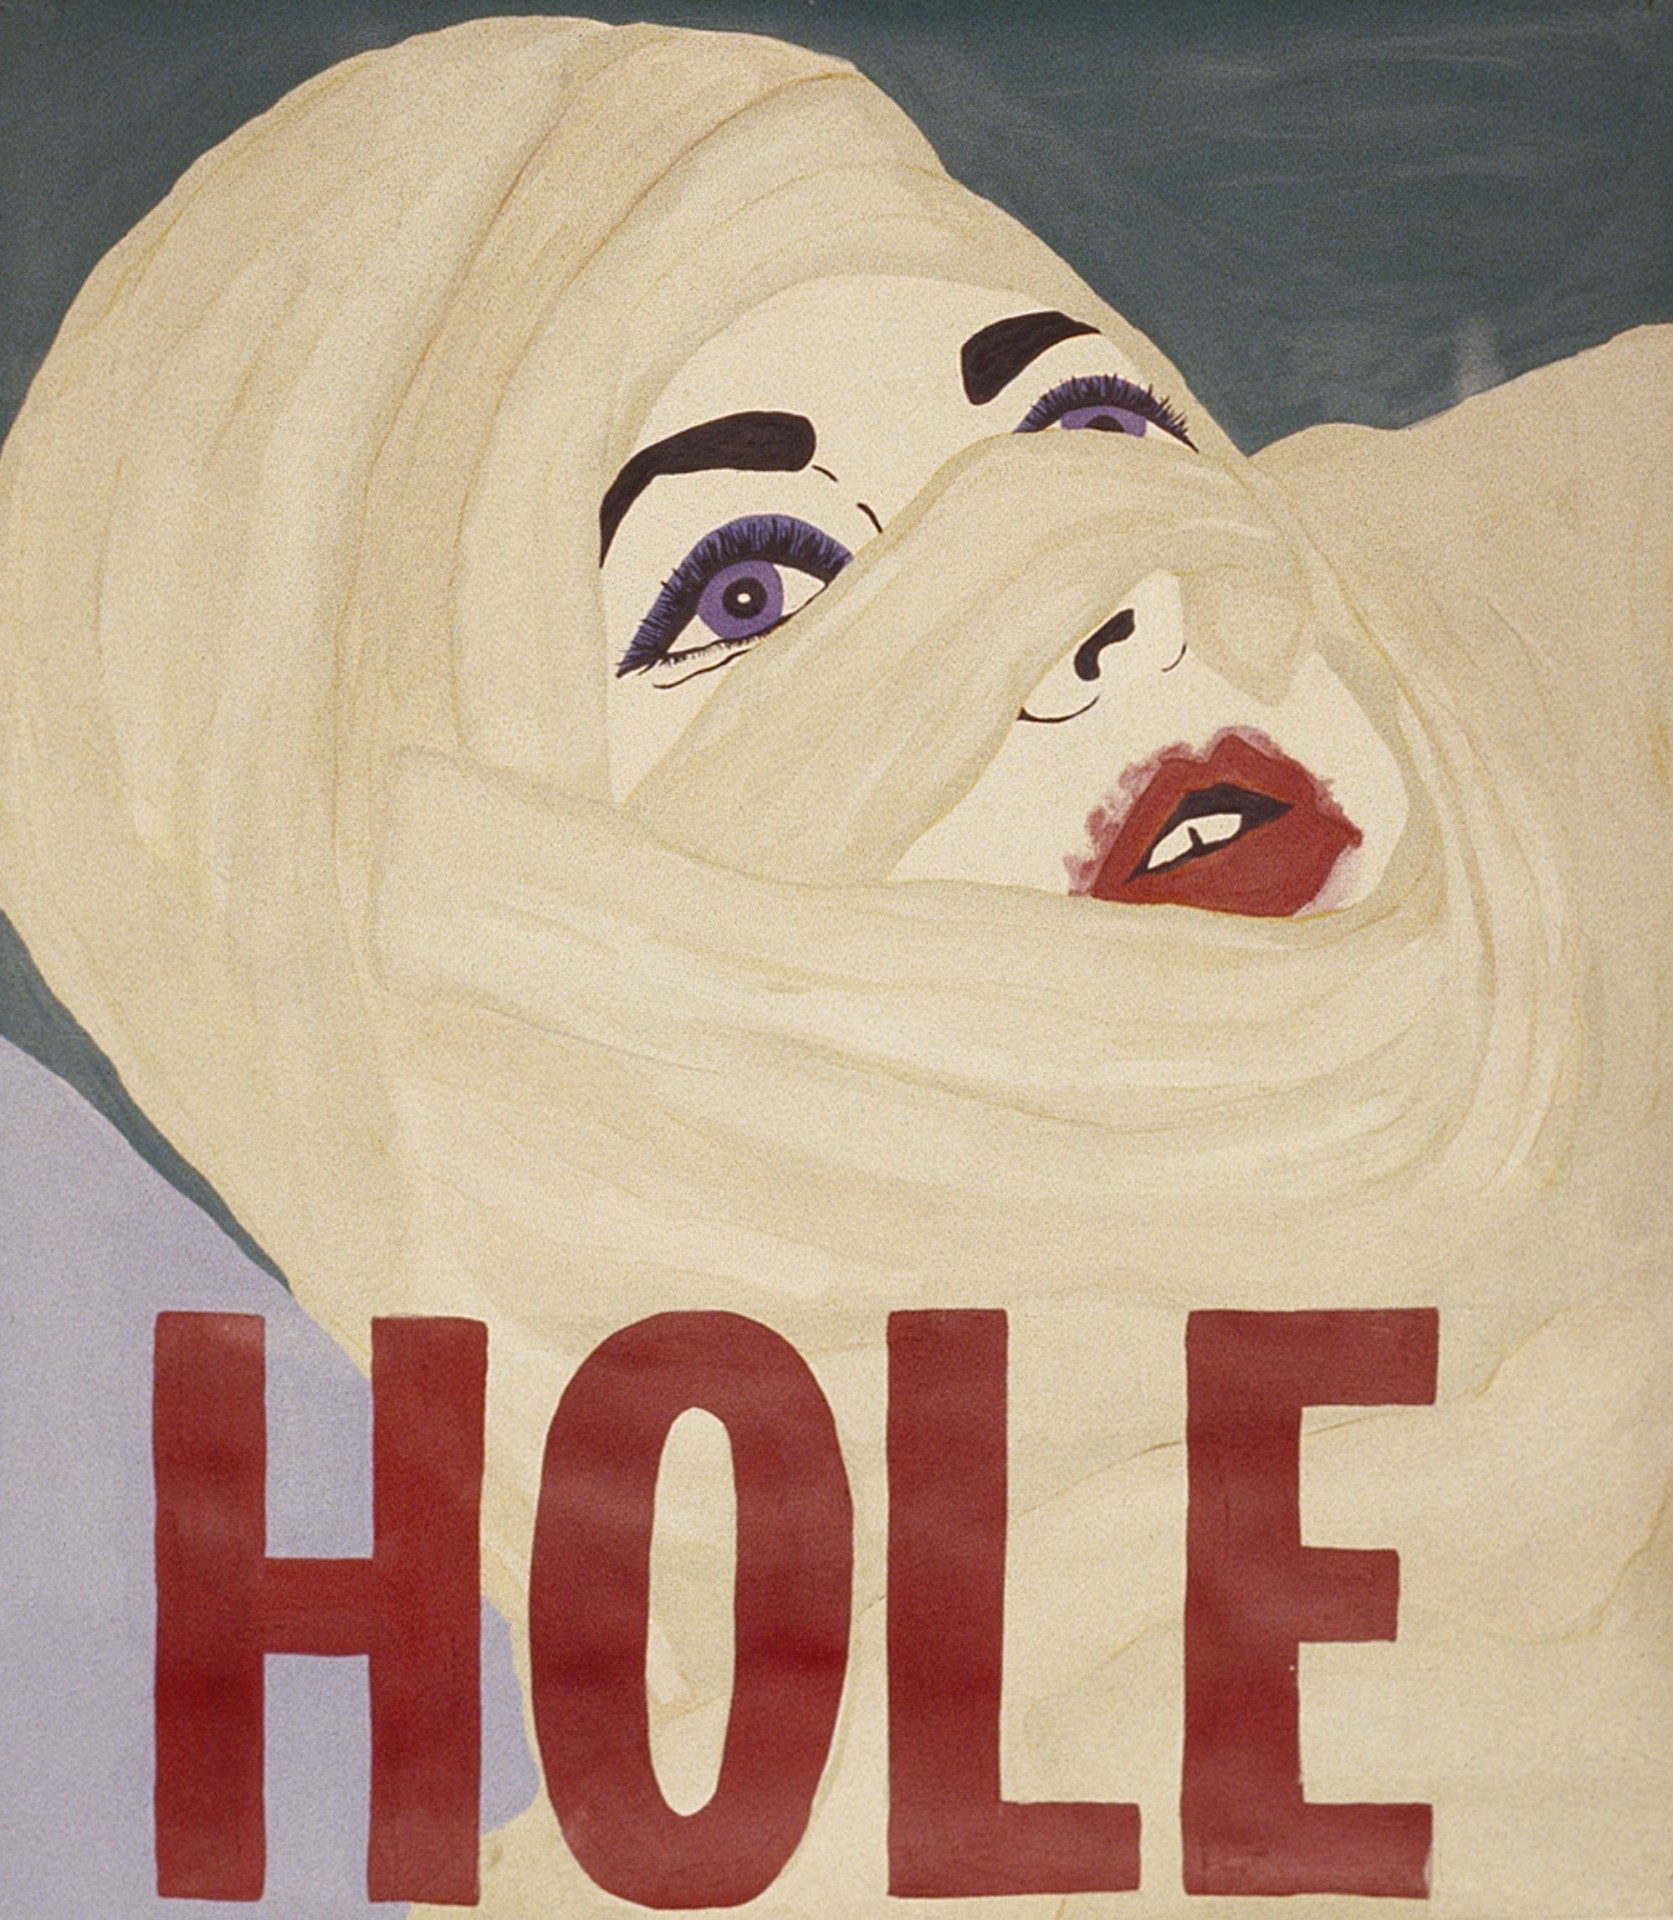 Kathe Burkhart, *Small Hole: from the Liz Taylor Series (Ash Wednesday)*, 2015. 7-color silkscreen print on paper (PARTICIPANT Annual [FRIENDS edition](http://participantinc.org/books-editions))